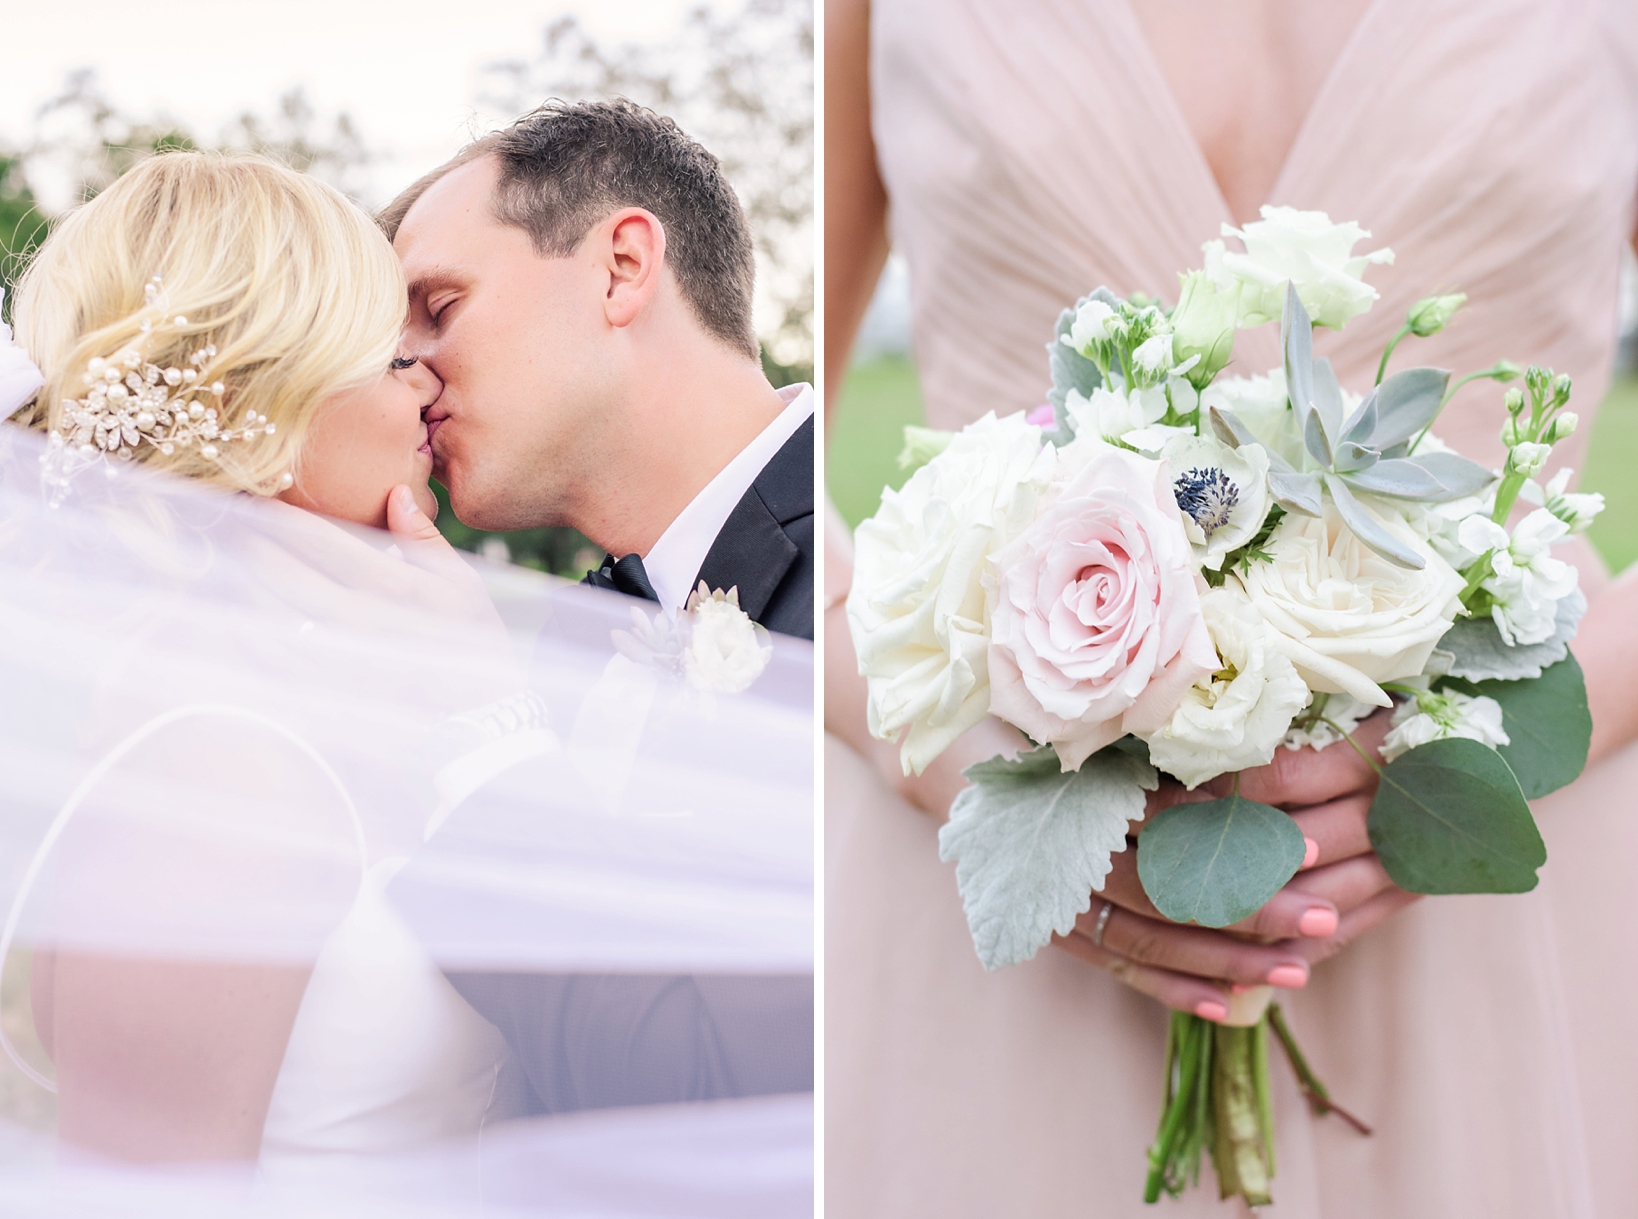 Bride and Groom kiss behind a veil and a close up of a bridesmaids flower bouquet